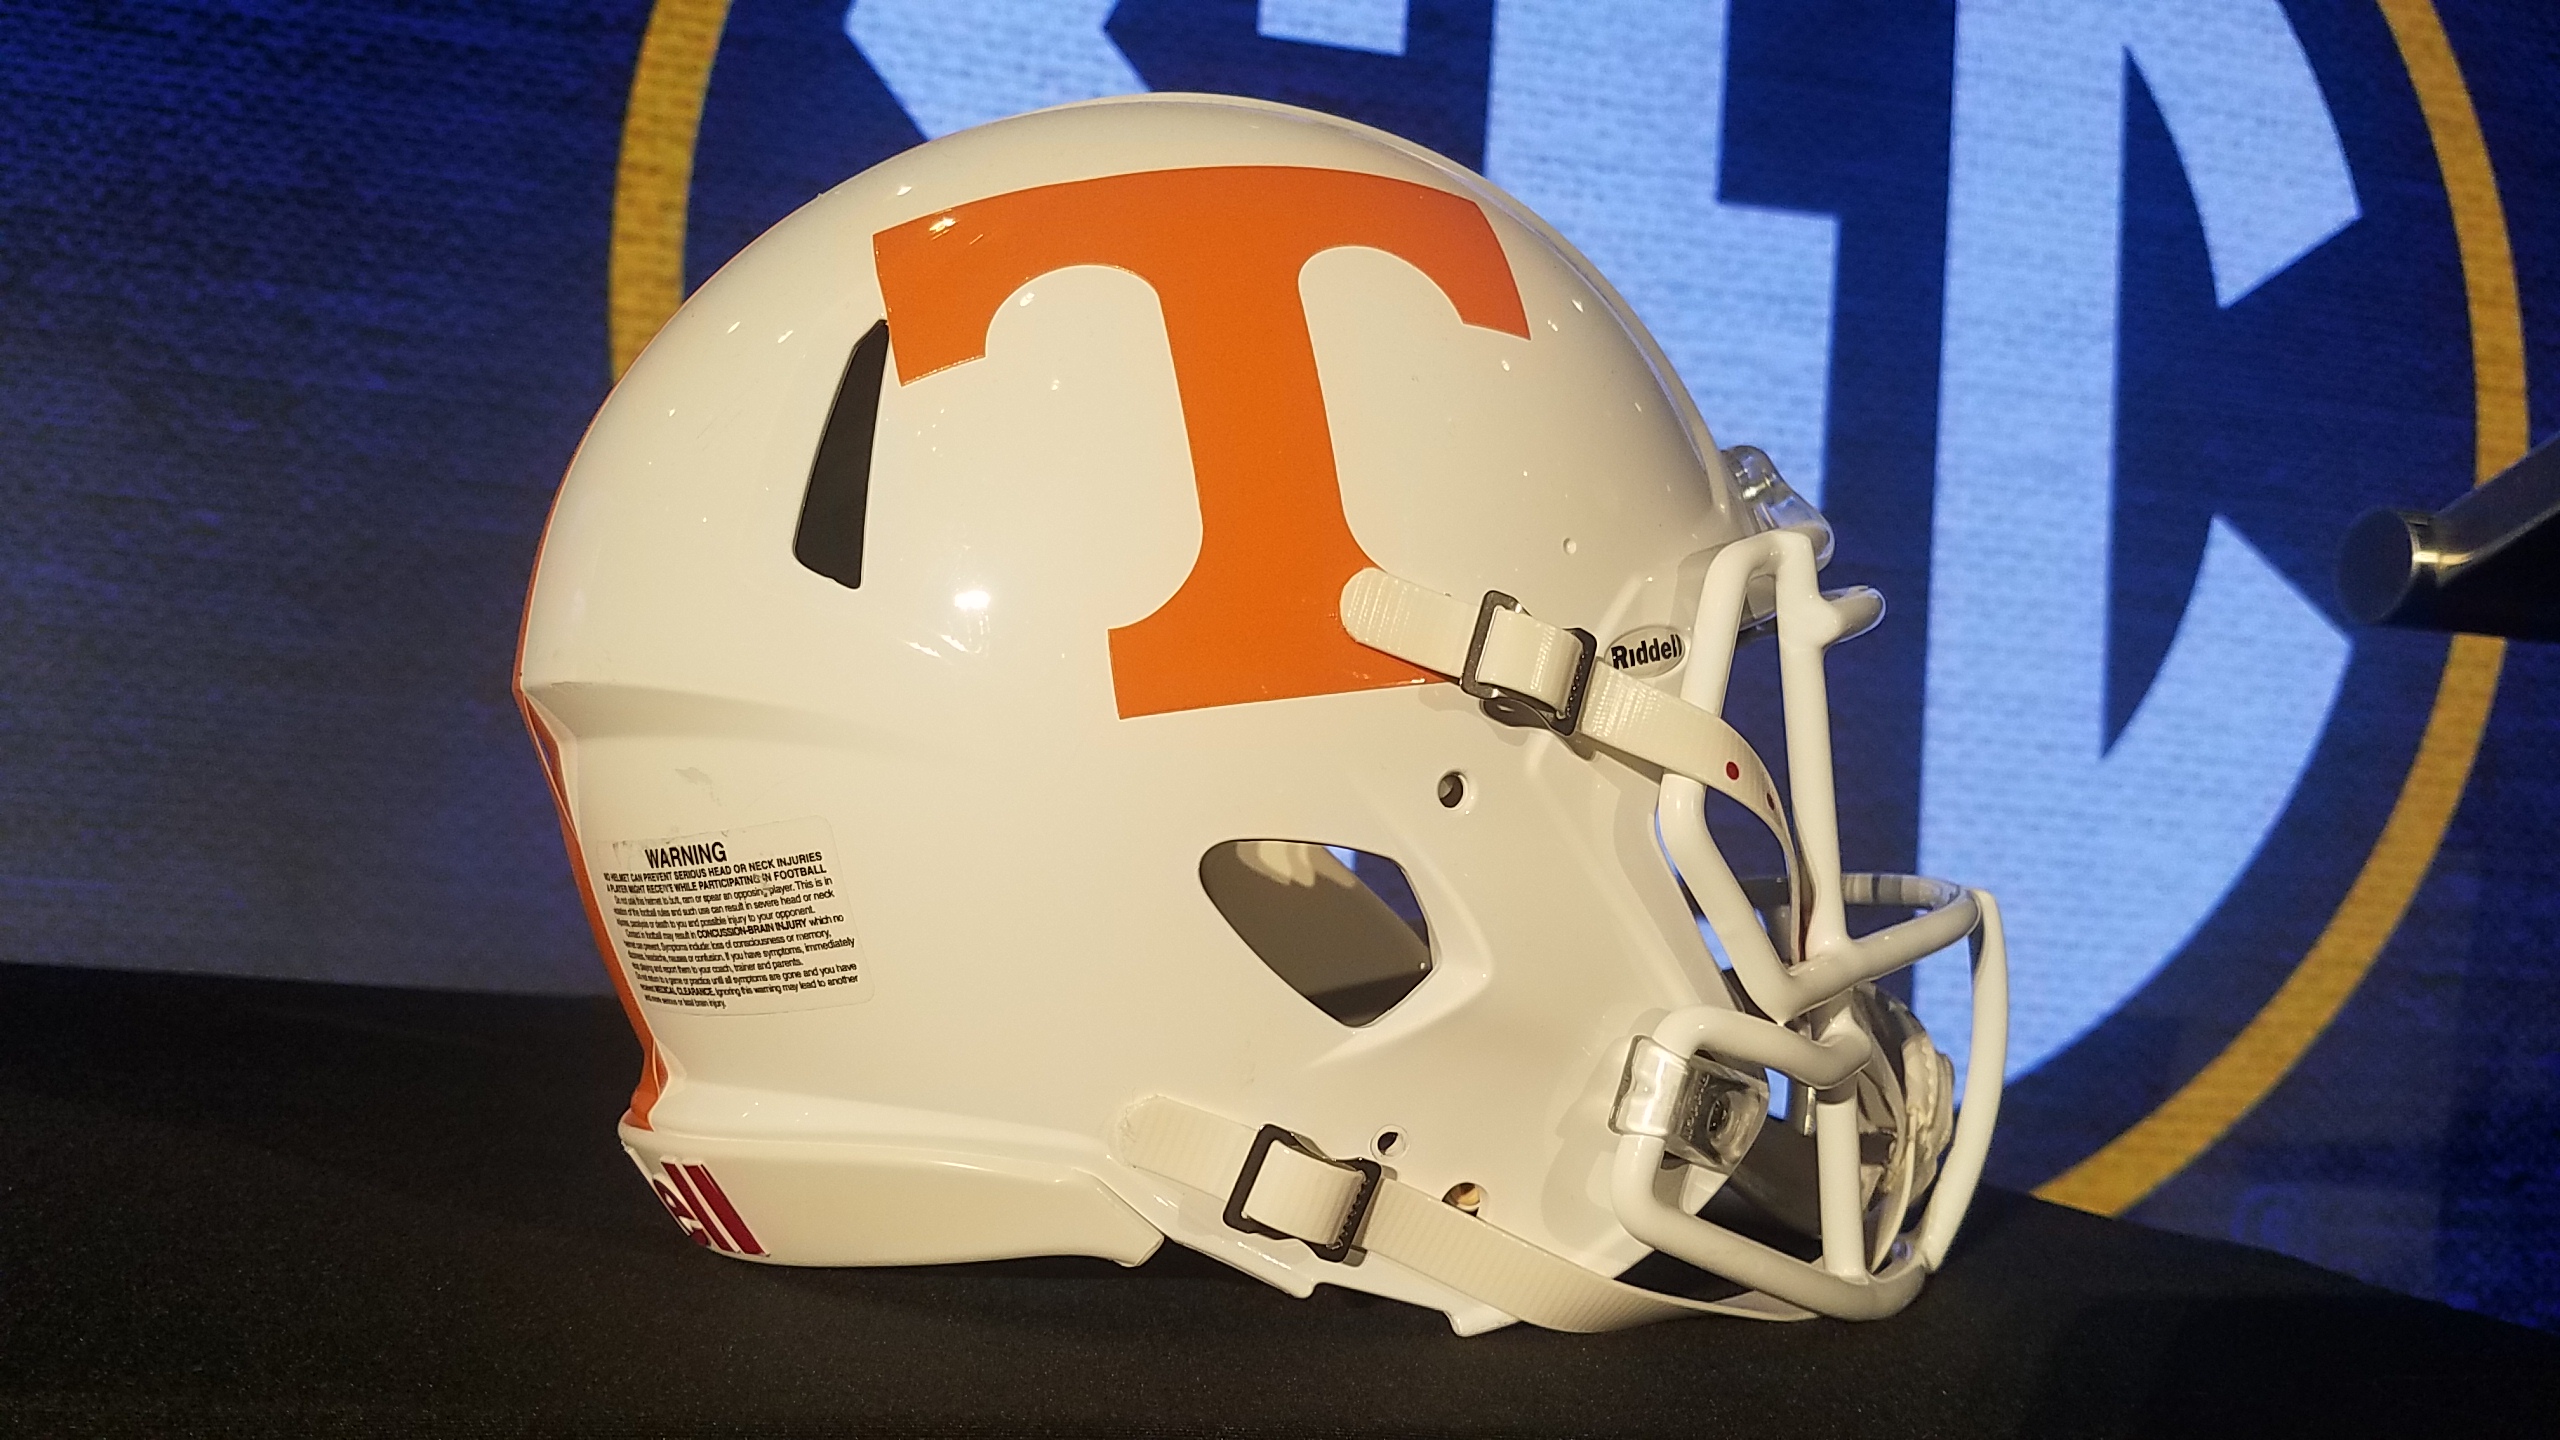 VIDEOS/PODCASTS: Everything from Tennessee at #SECMD21